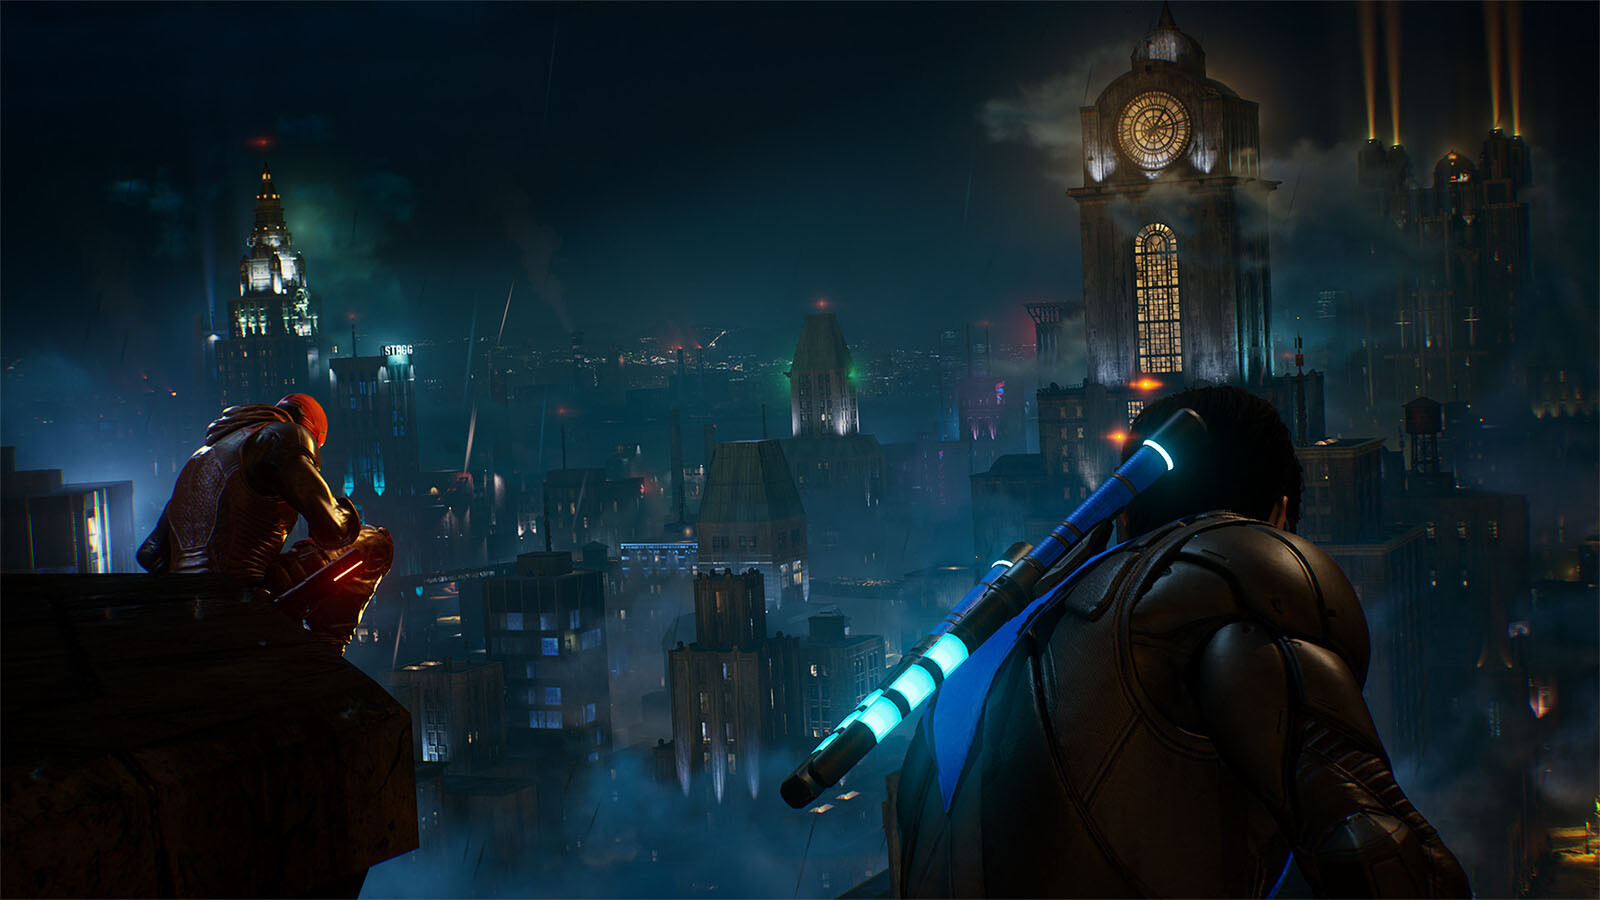 Gotham Knights release date  UK launch time & Game Pass status